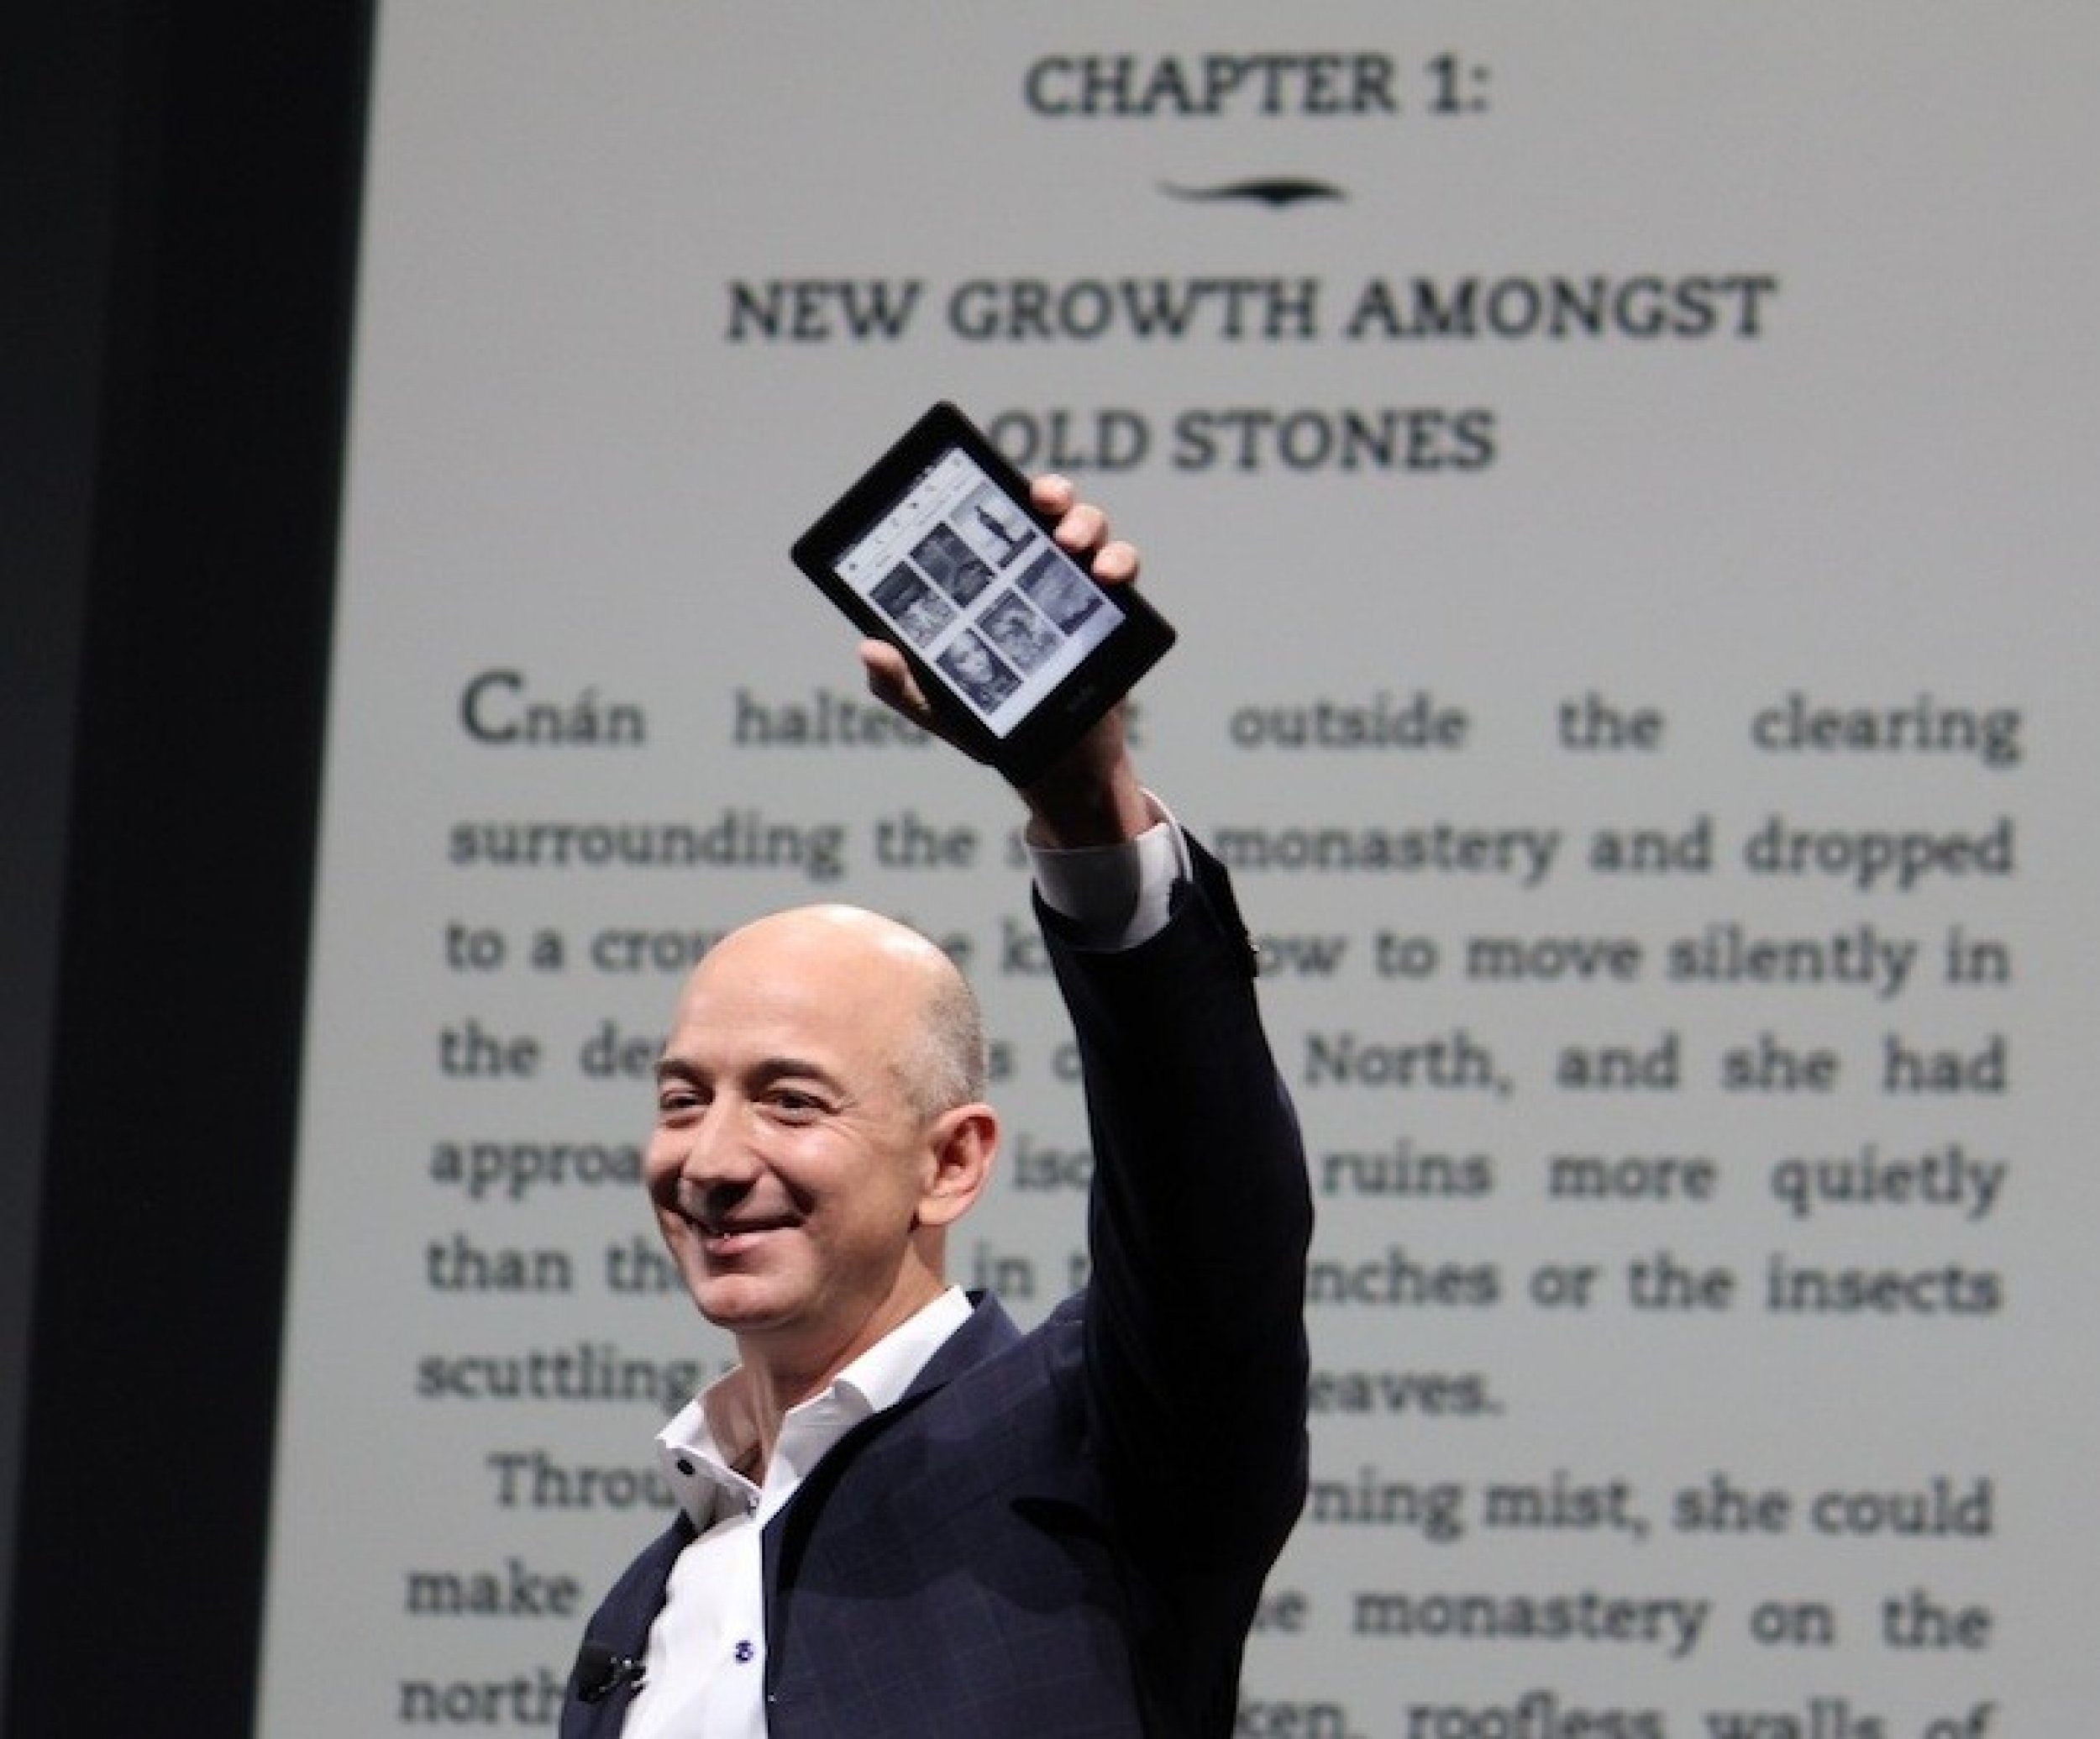 Amazon Unveils Kindle Paperwhite With AllNew Features, Specs and Price